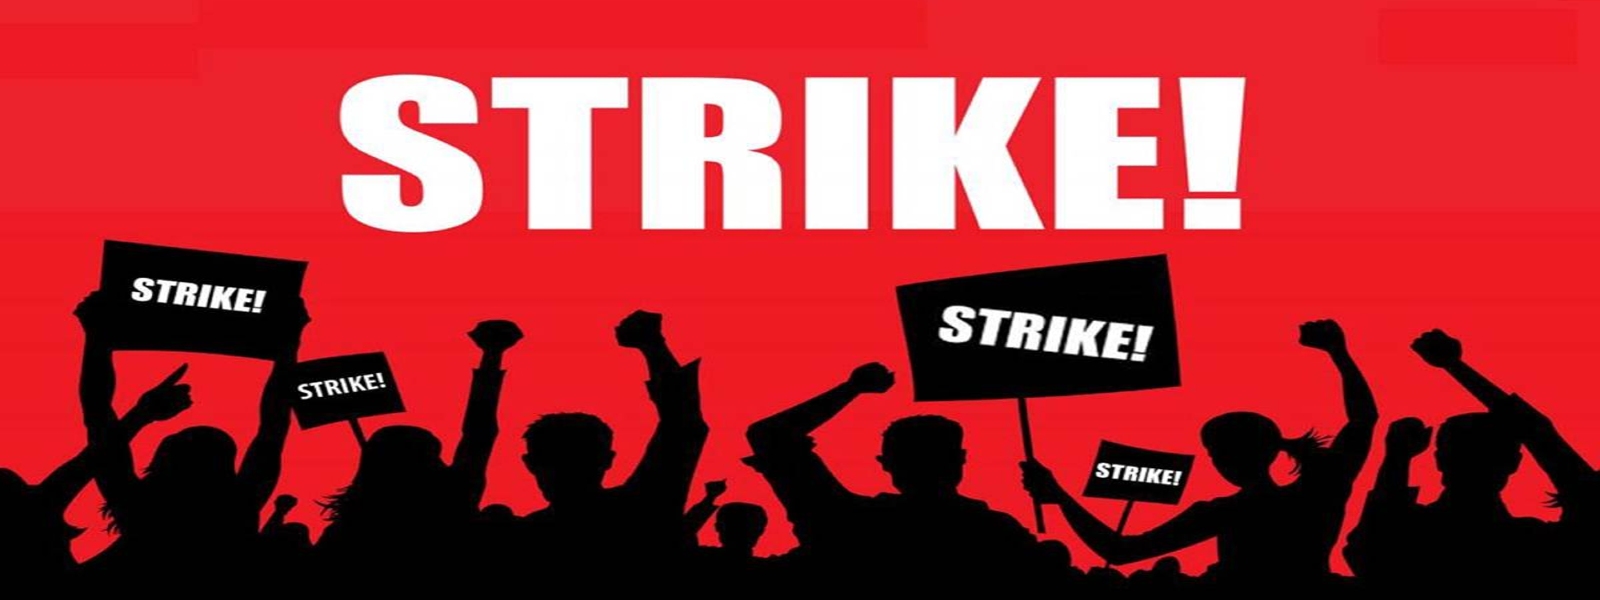 Lankan Health Workers Strike for Equal Allowance